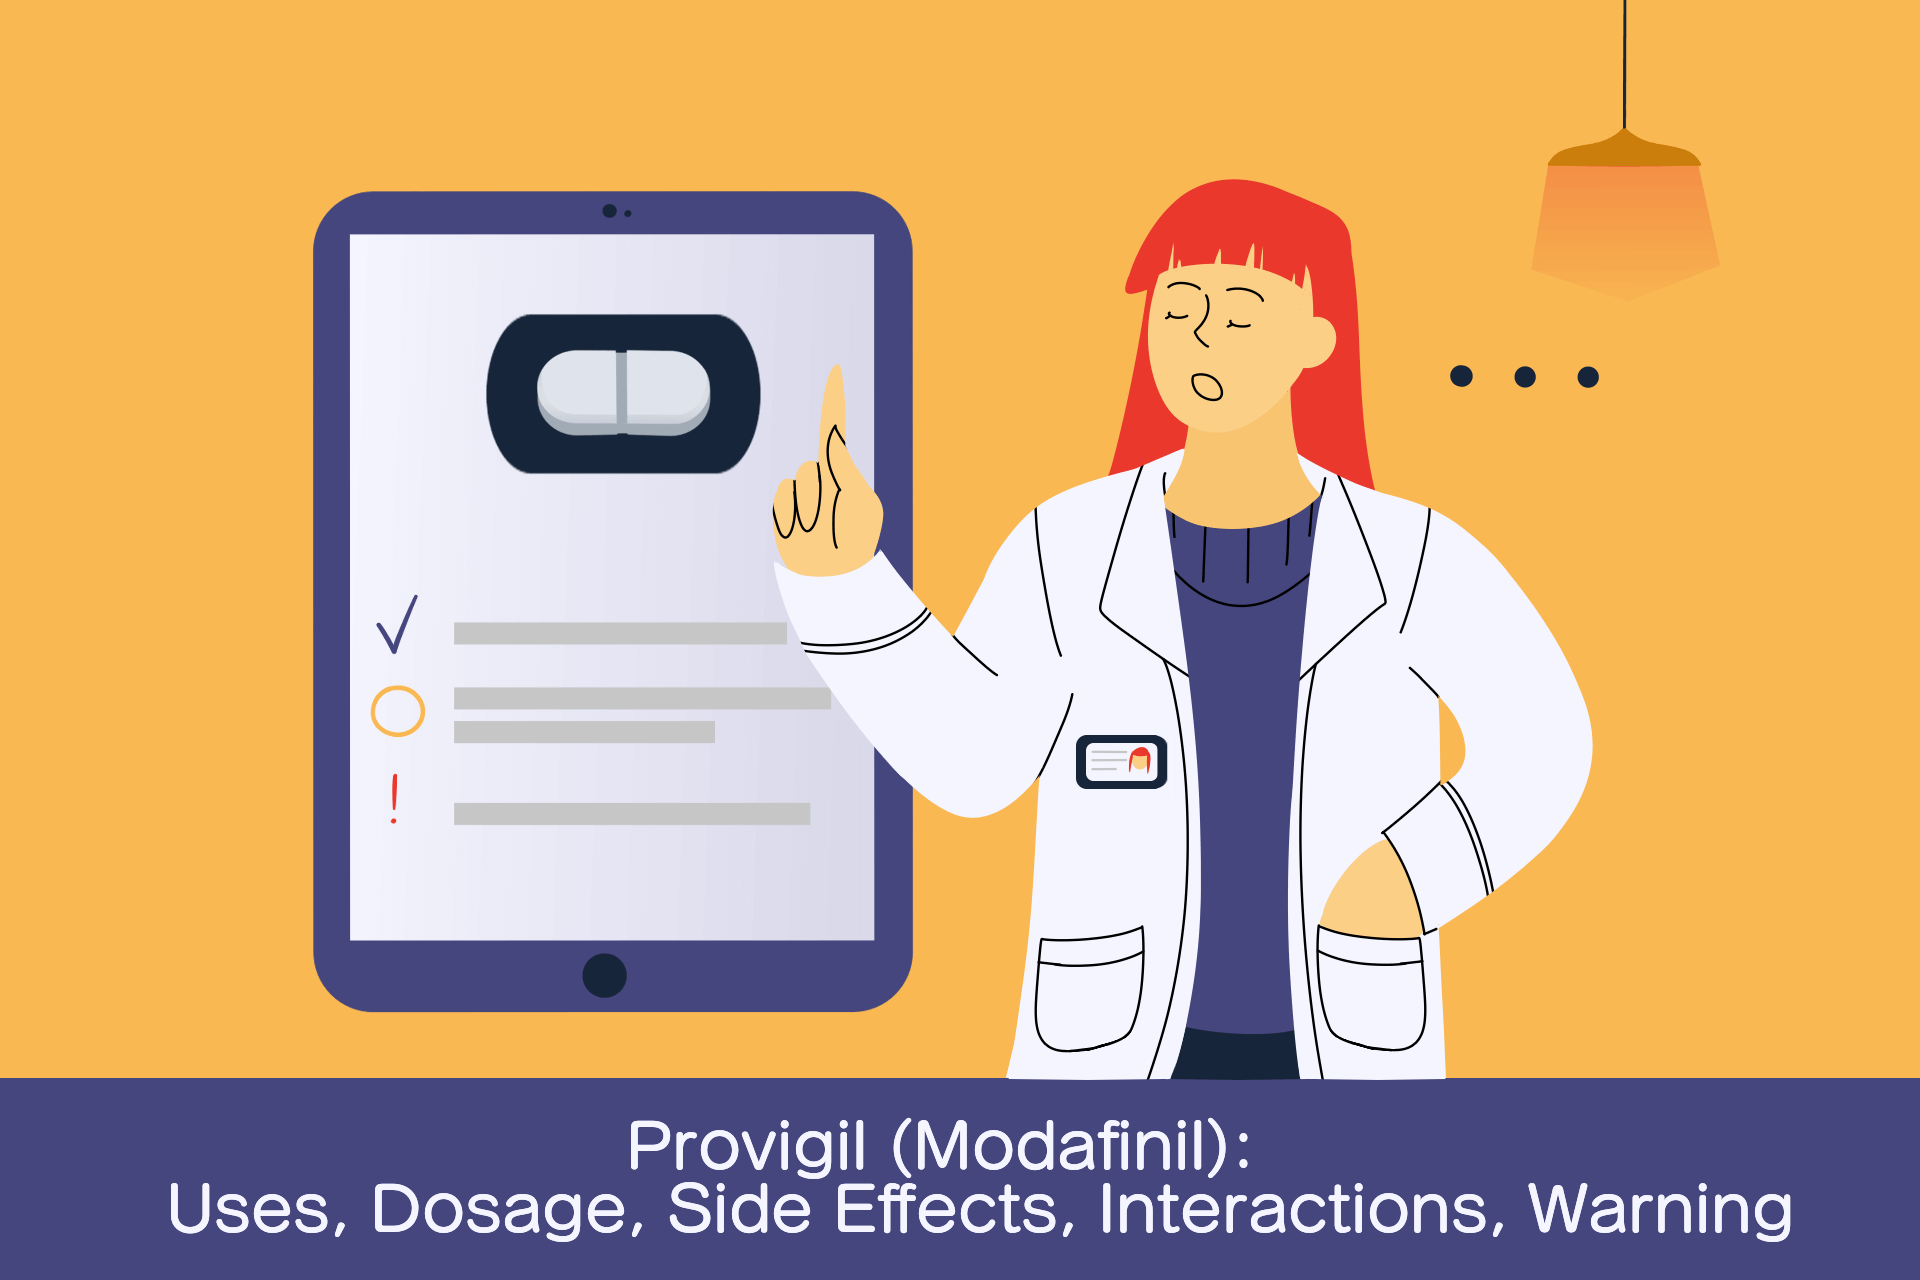 Provigil (Modafinil): Uses, Dosage, Side Effects, Interactions, Warning